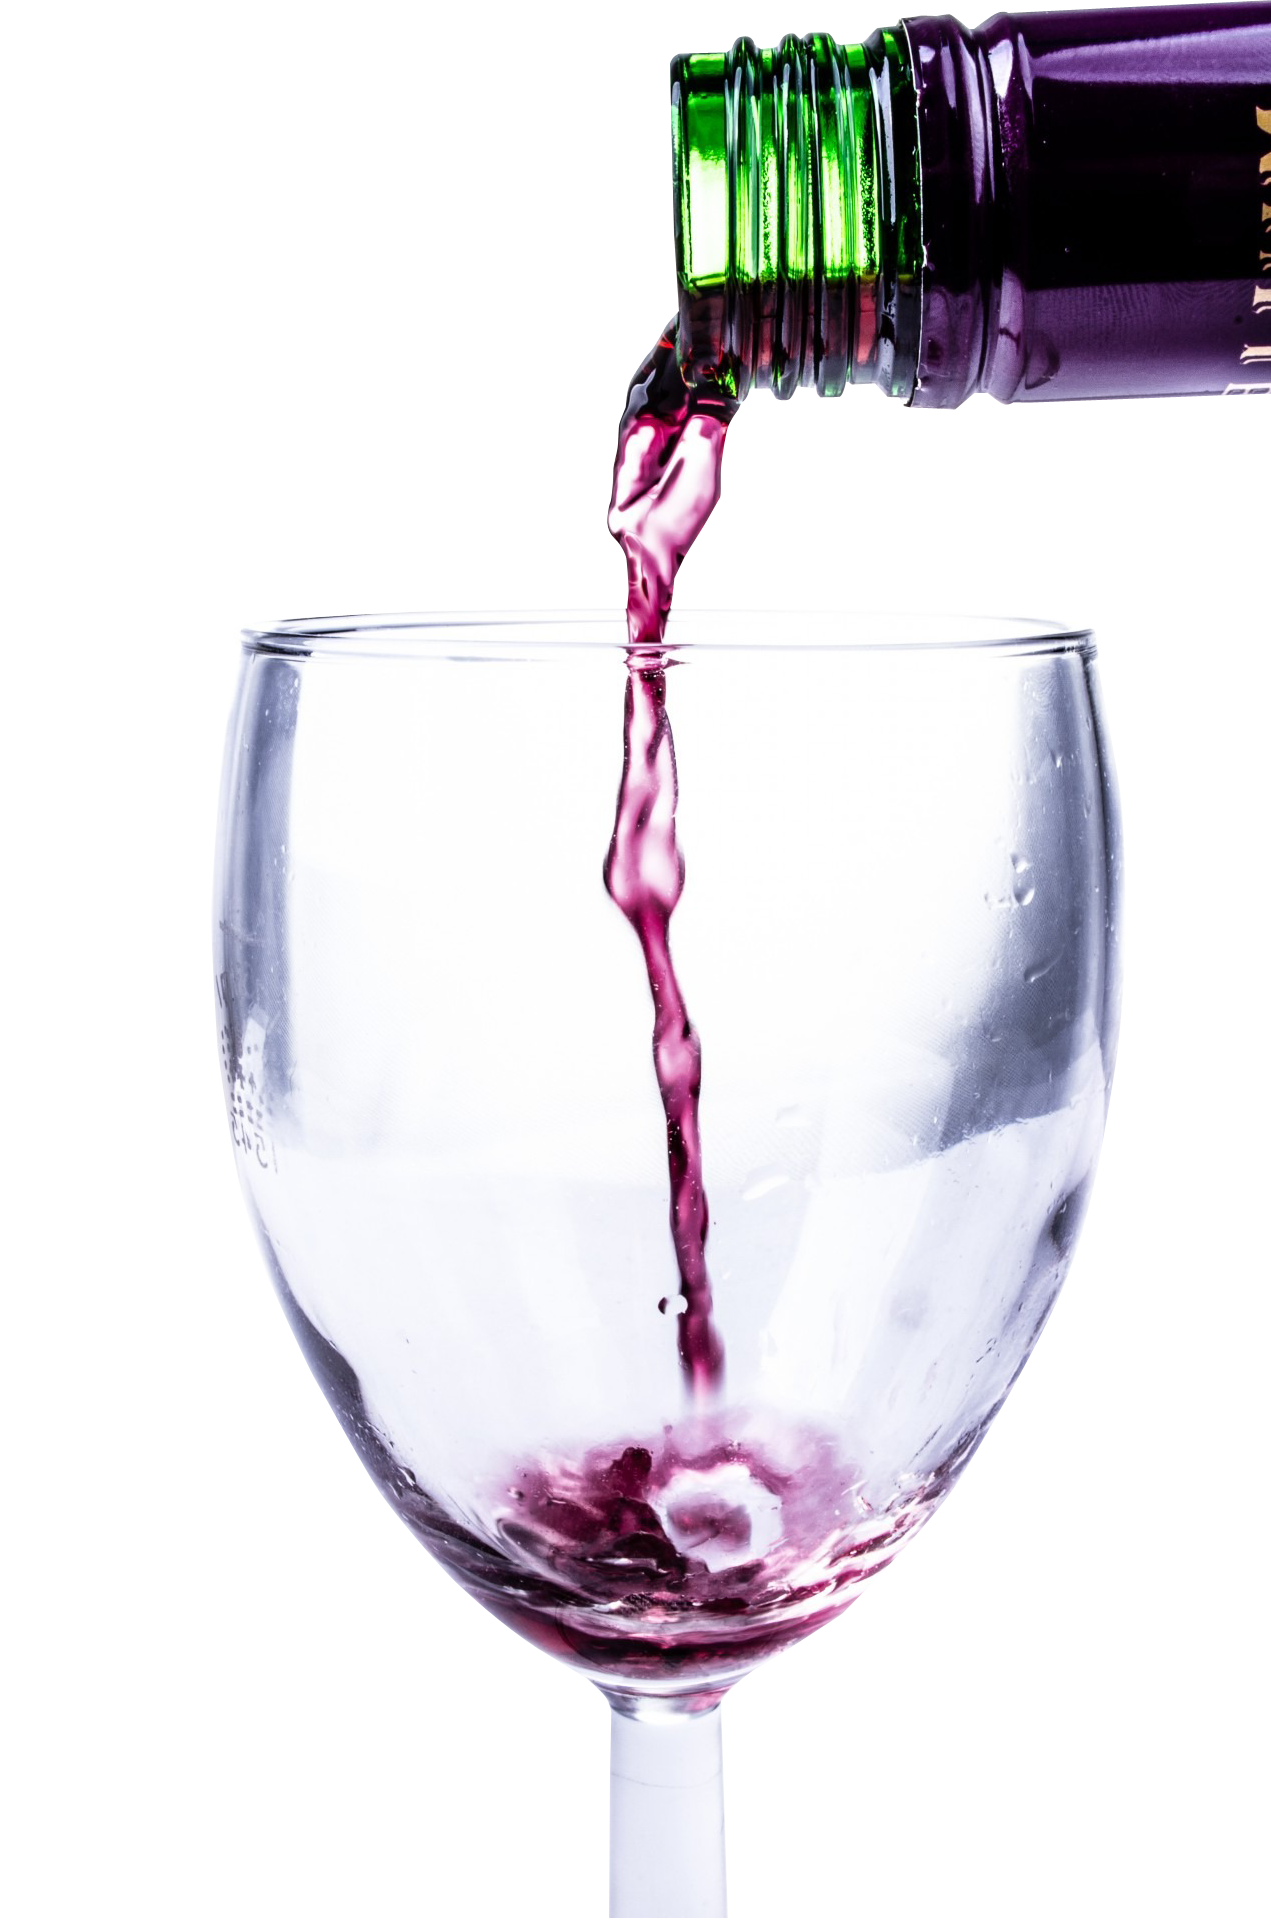 Wine PNG Image